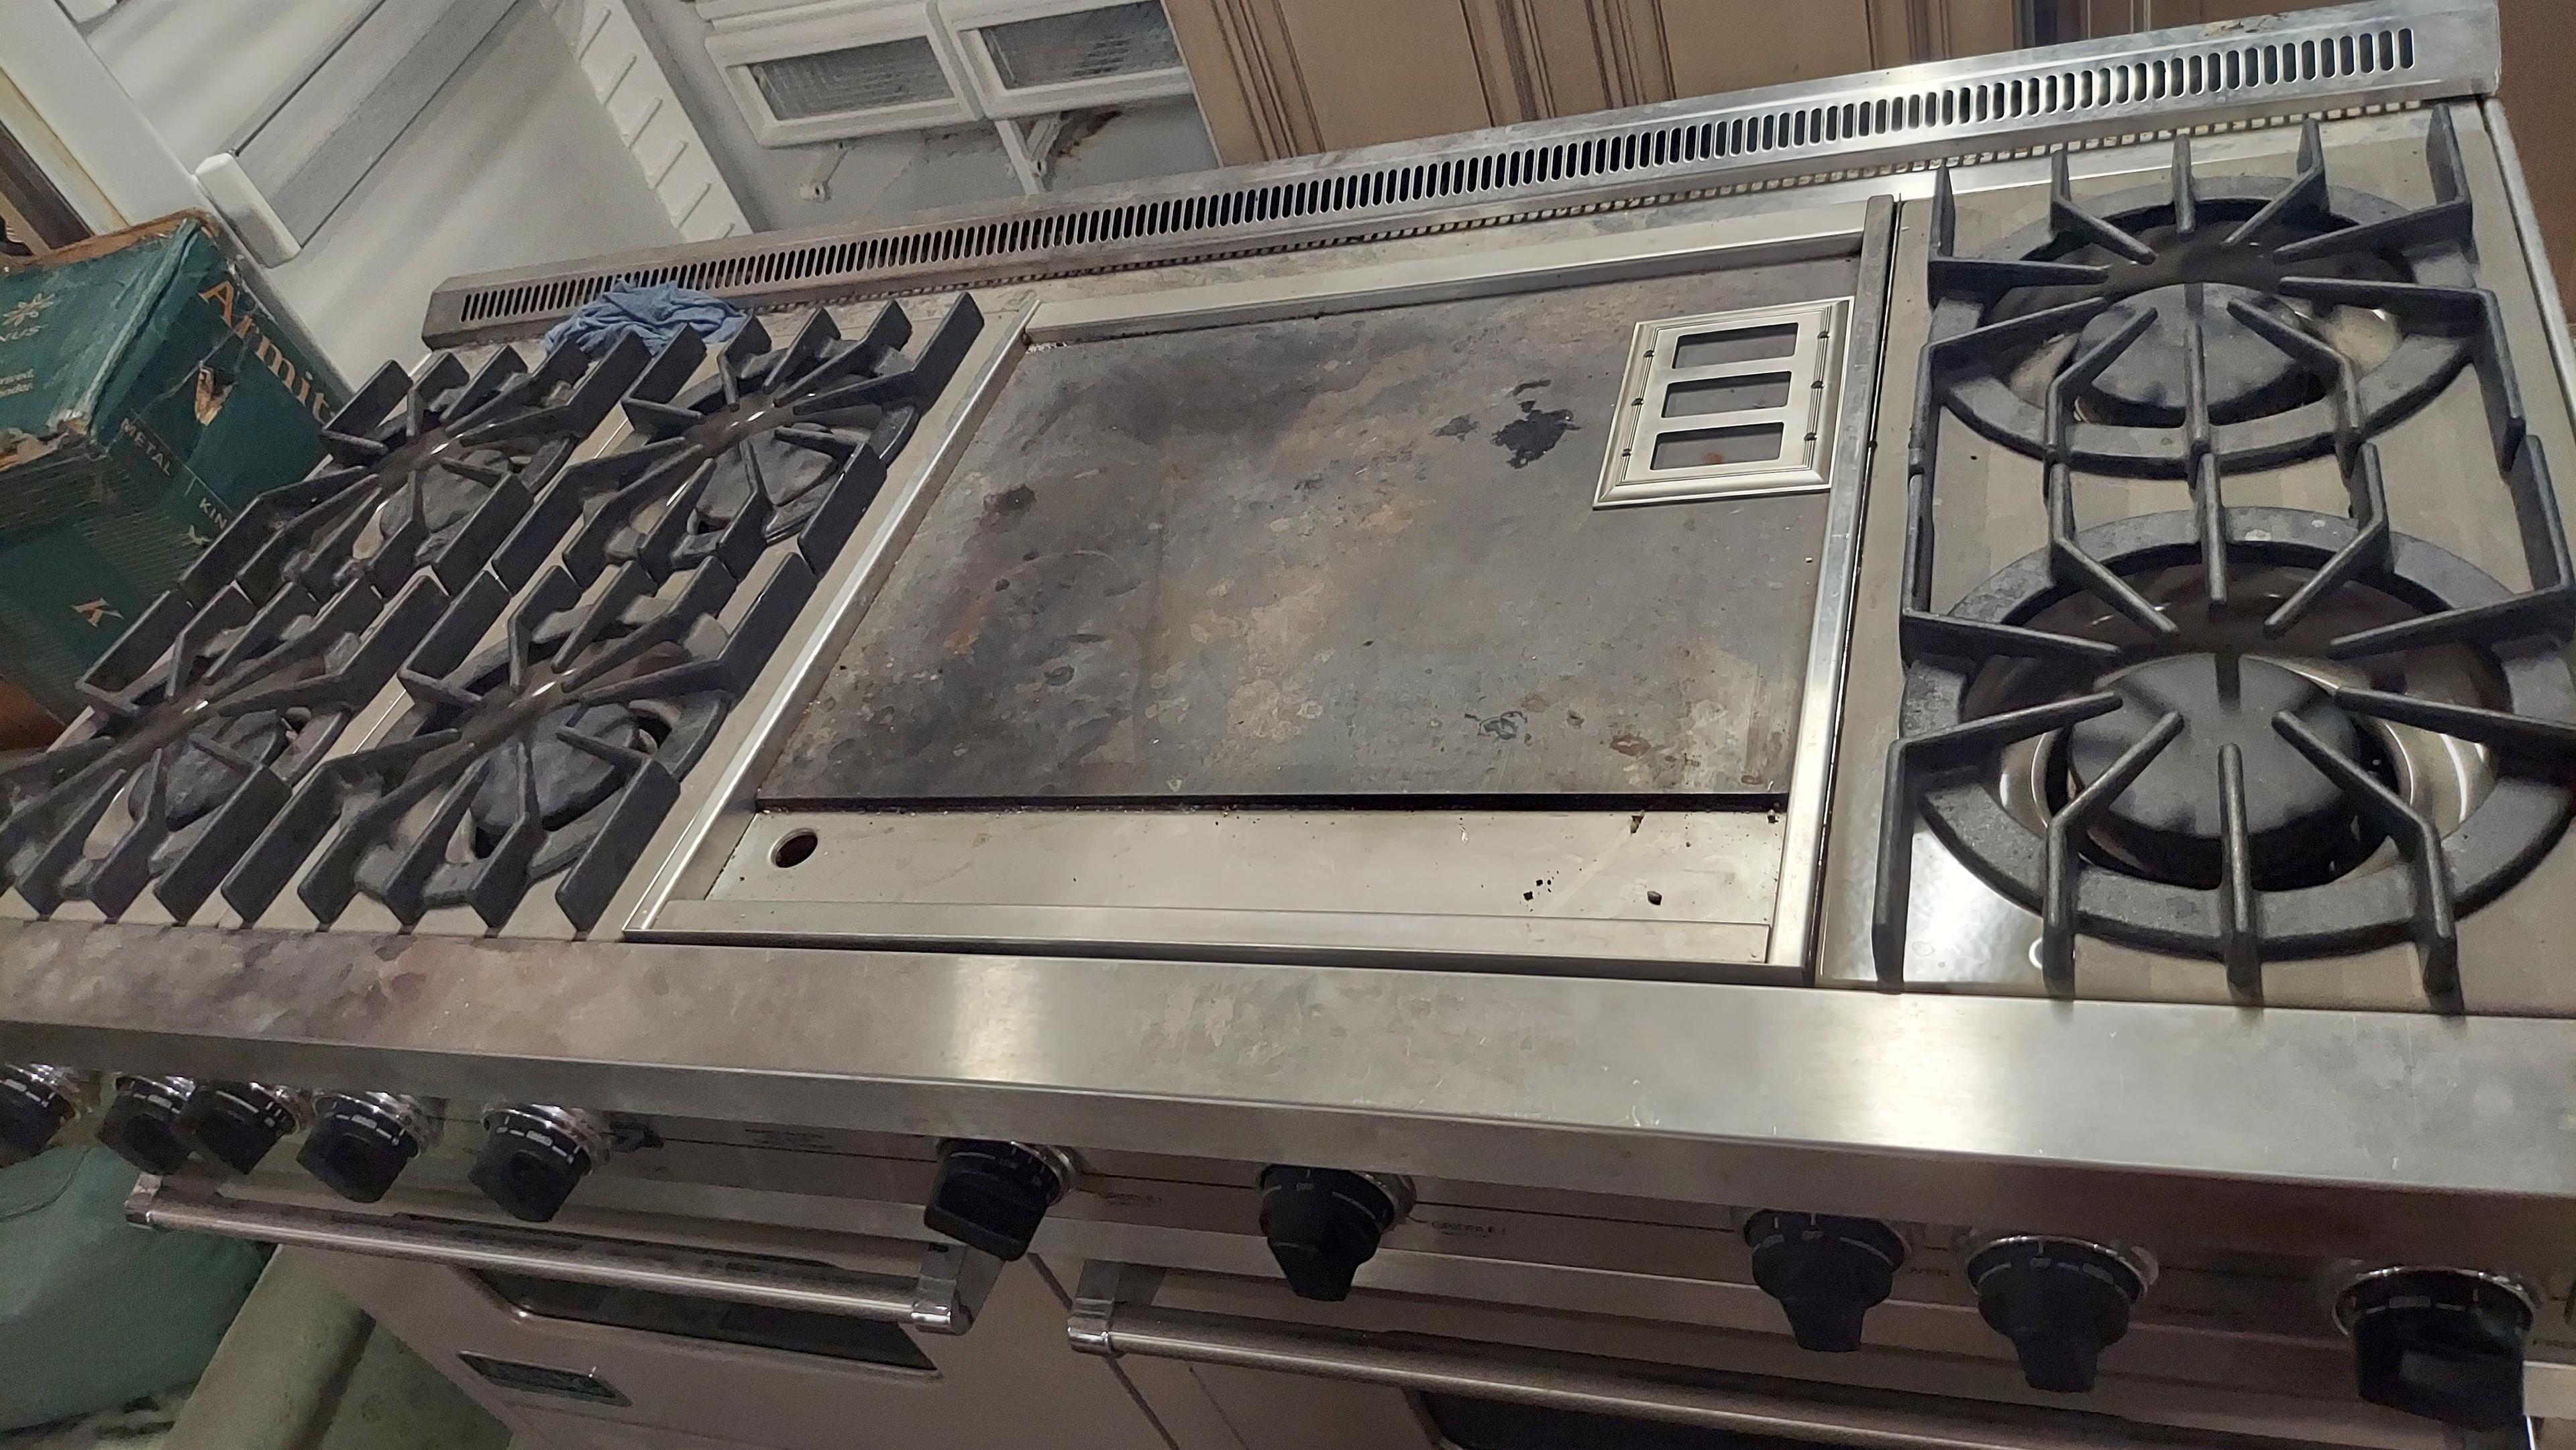 Viking (6) Burner Range, 24" Griddle With Double Convection Ovens. Gas Fired